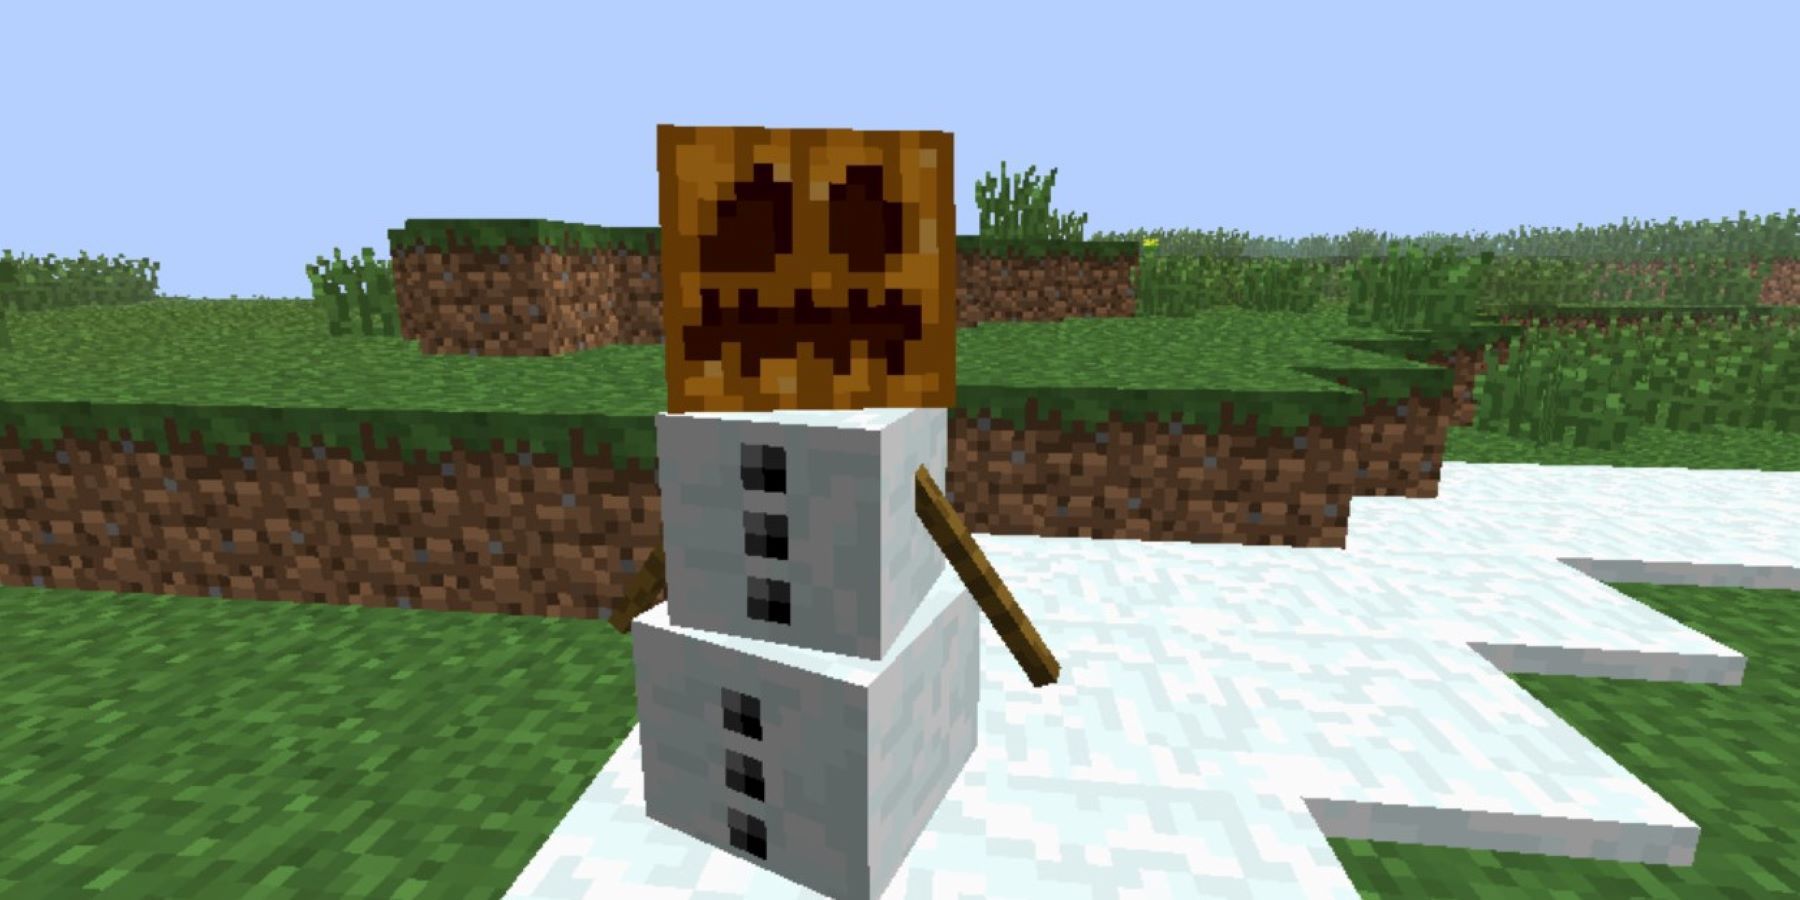 A snow golem looking at at a Minecraft player